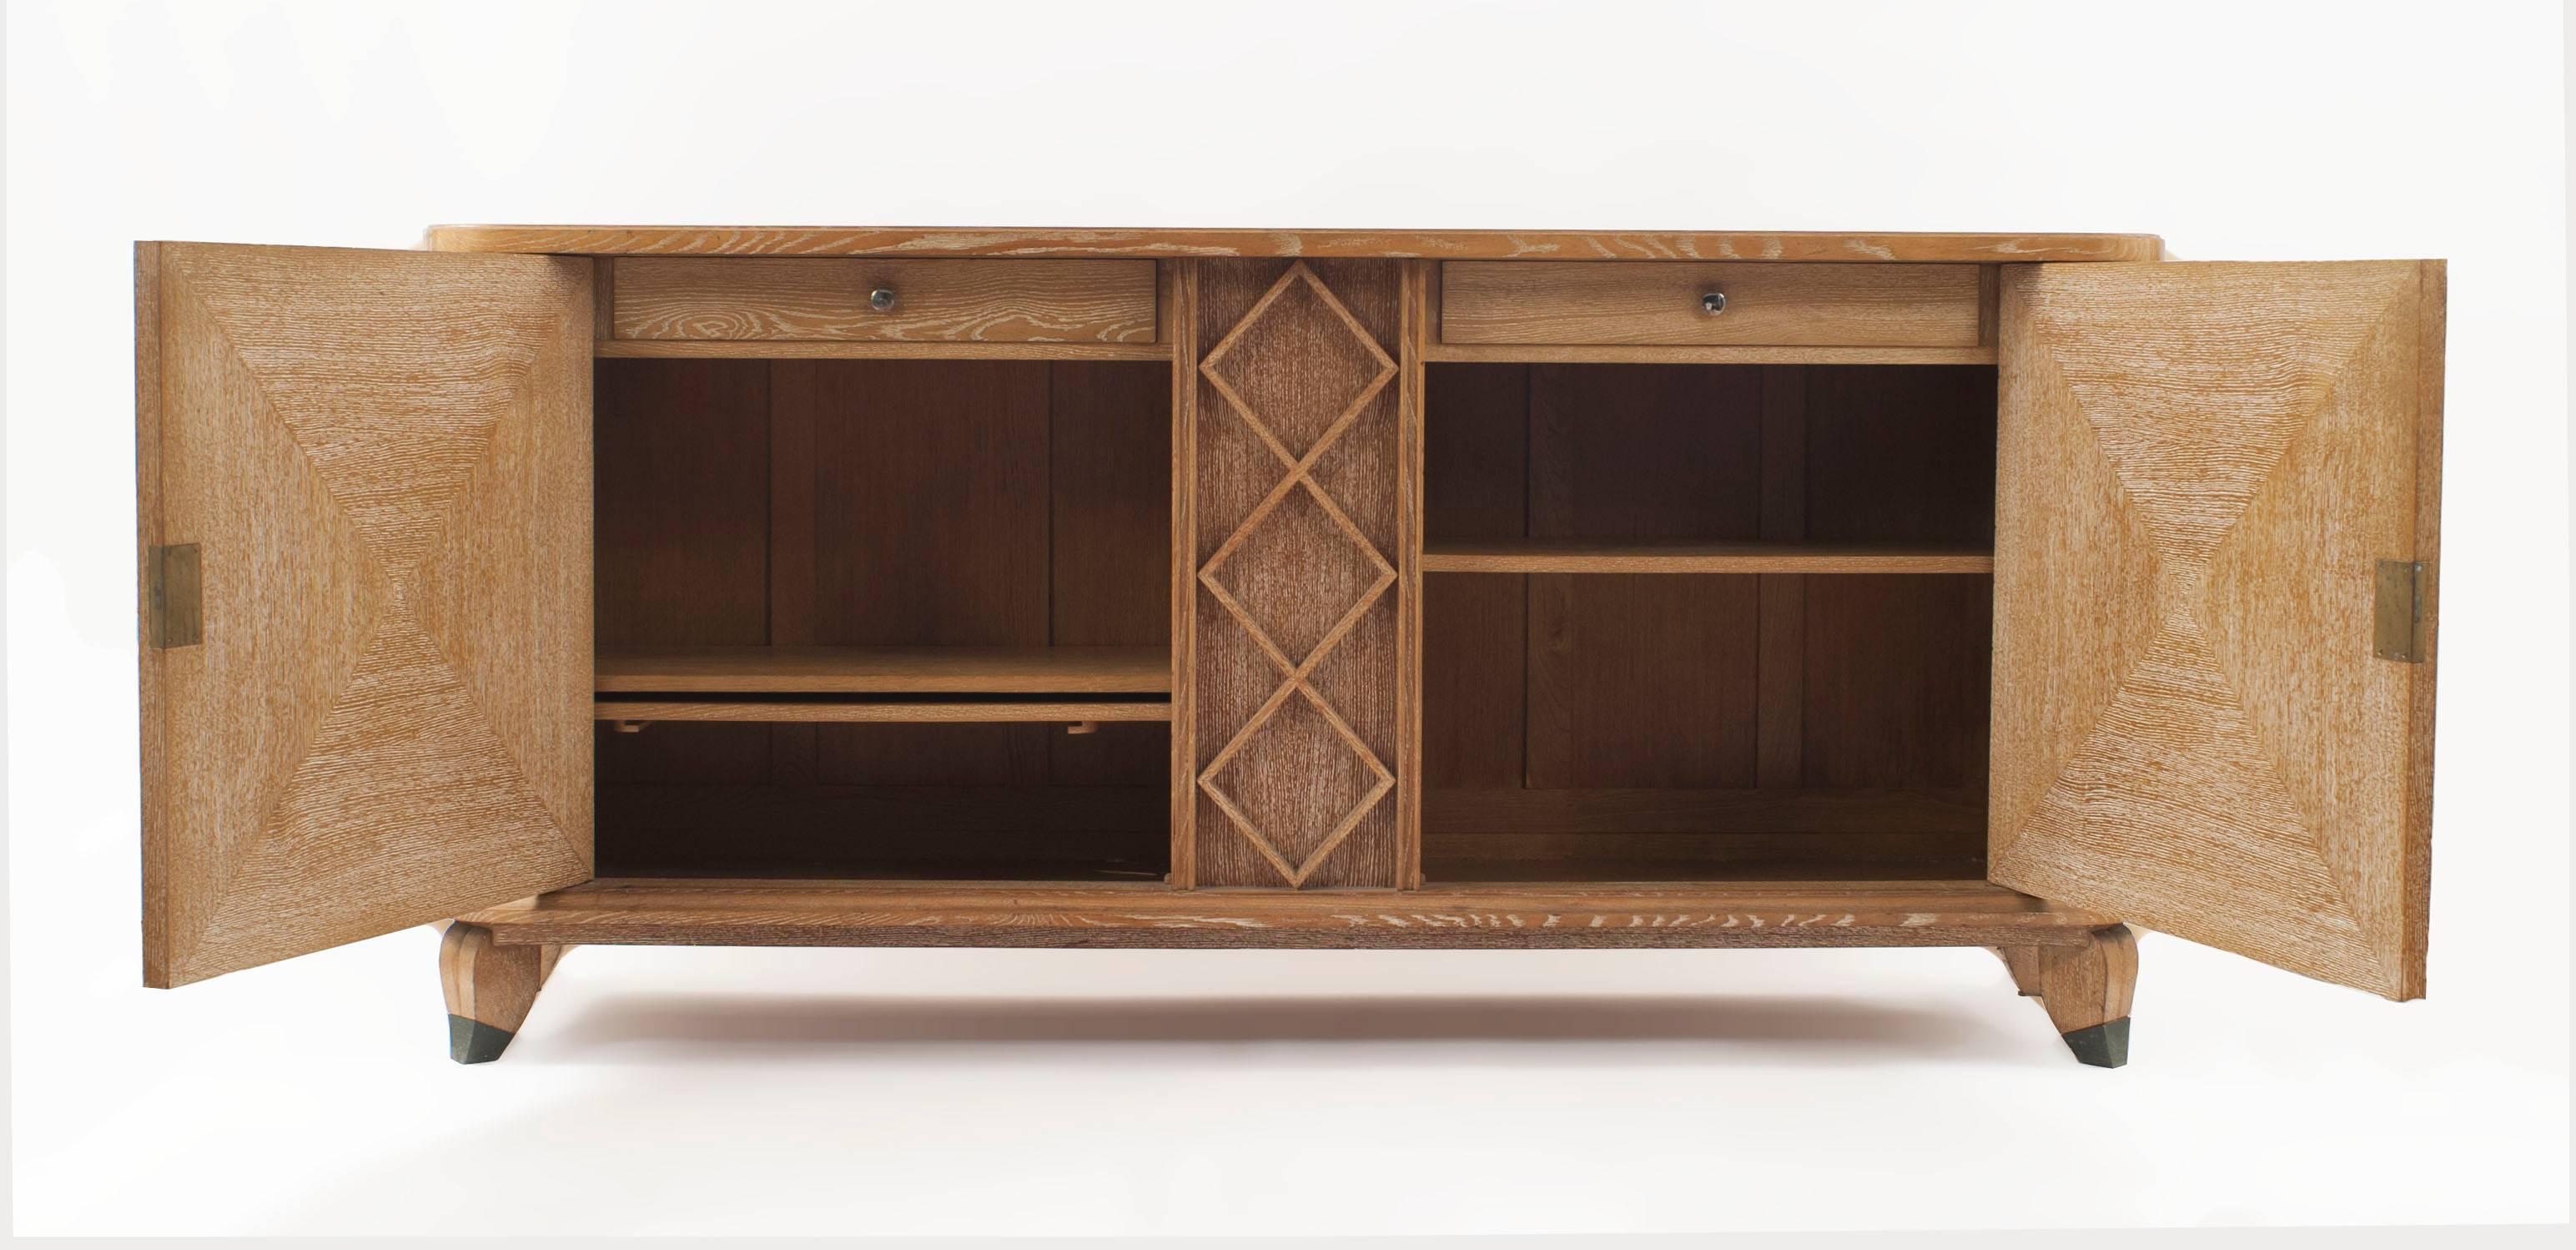 French mid-century (1940s) cerused oak buffet with two drawers behind two doors having centered ebonized bronze masks and trim with a geometric design centre panel (Andre Arbus).

André Arbus was a French furniture designer, sculptor and